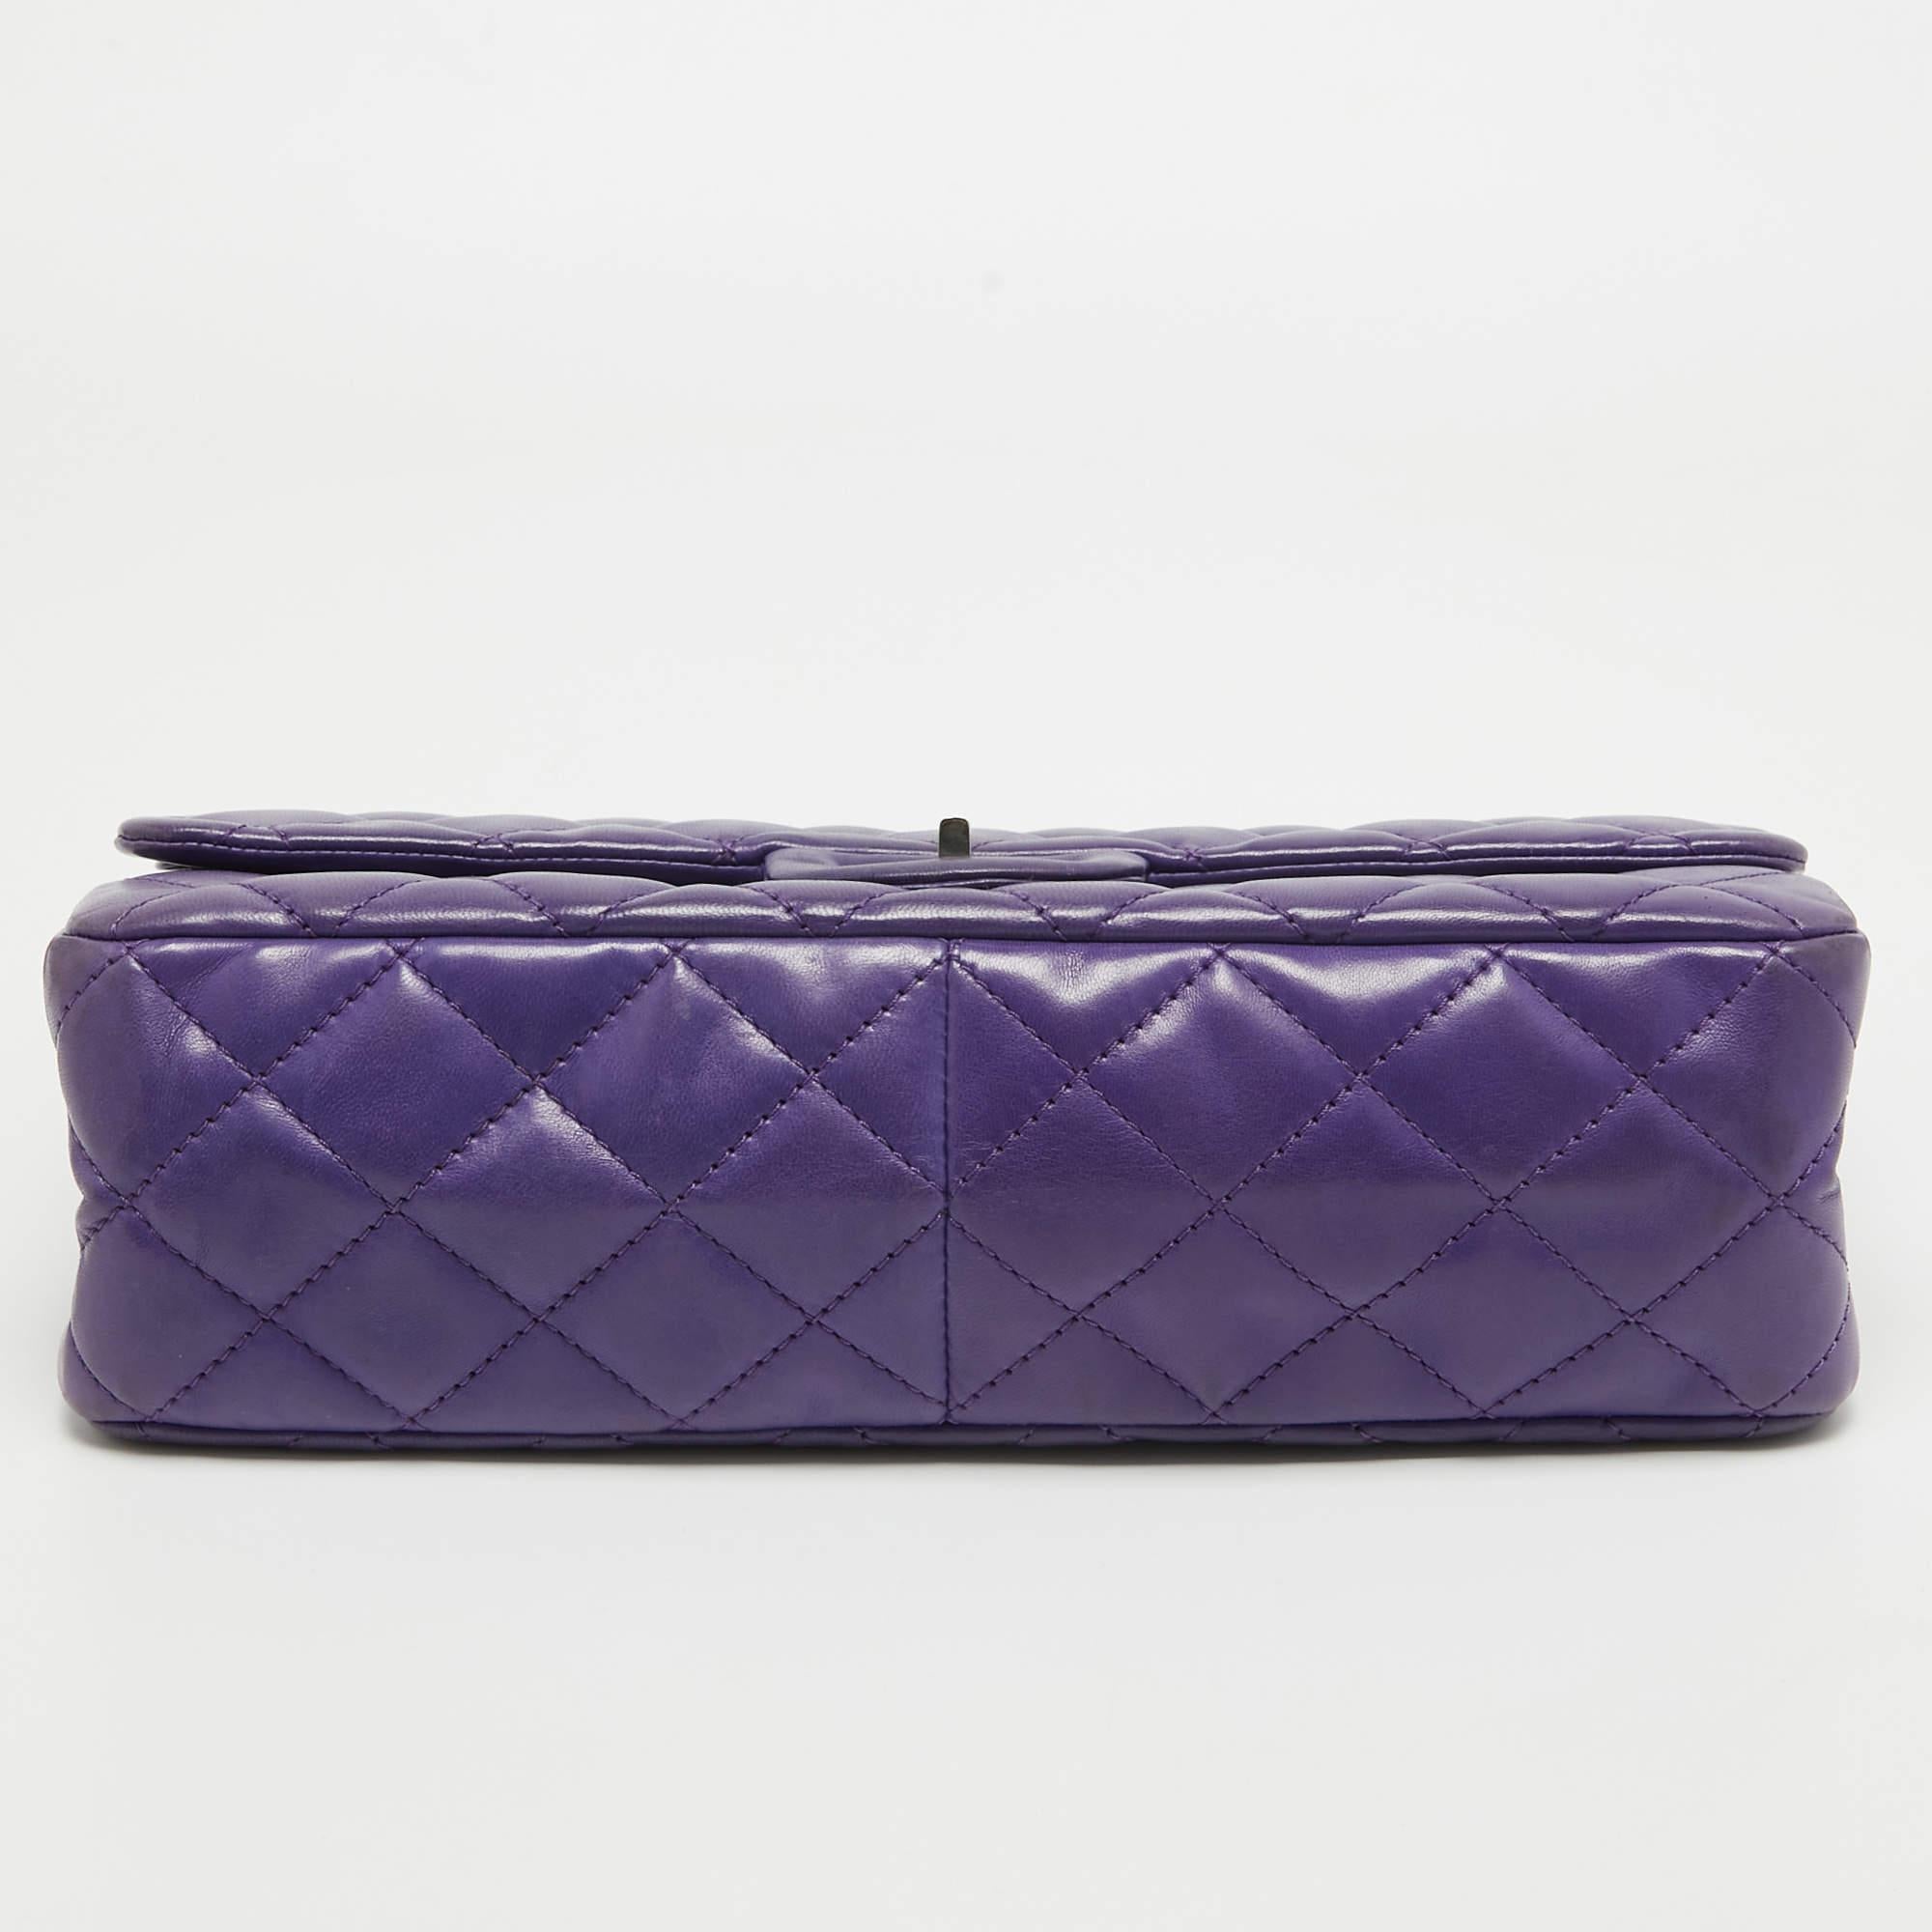 Chanel Purple Quilted Leather 227 Reissue 2.55 Flap Bag For Sale 1